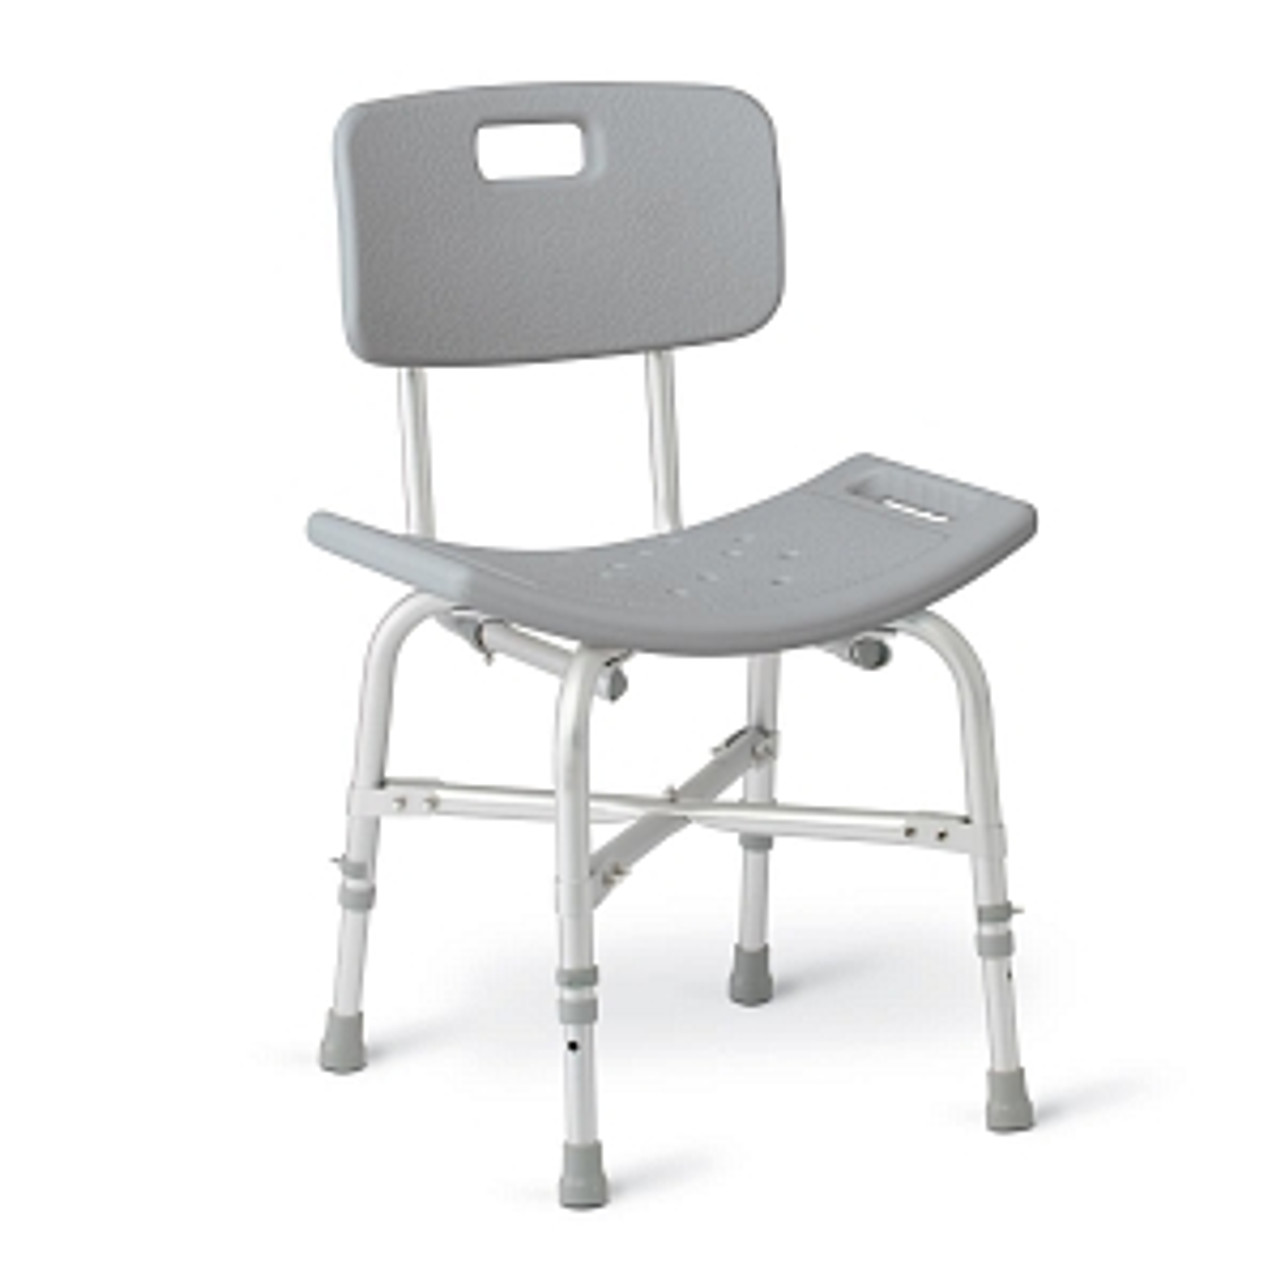 Bath bench for patients who have difficulty sitting in a standard bathtub or standing in the shower
Legs are height adjustable for a proper fit
650 lb. weight capacity
Does not come in retail packaging